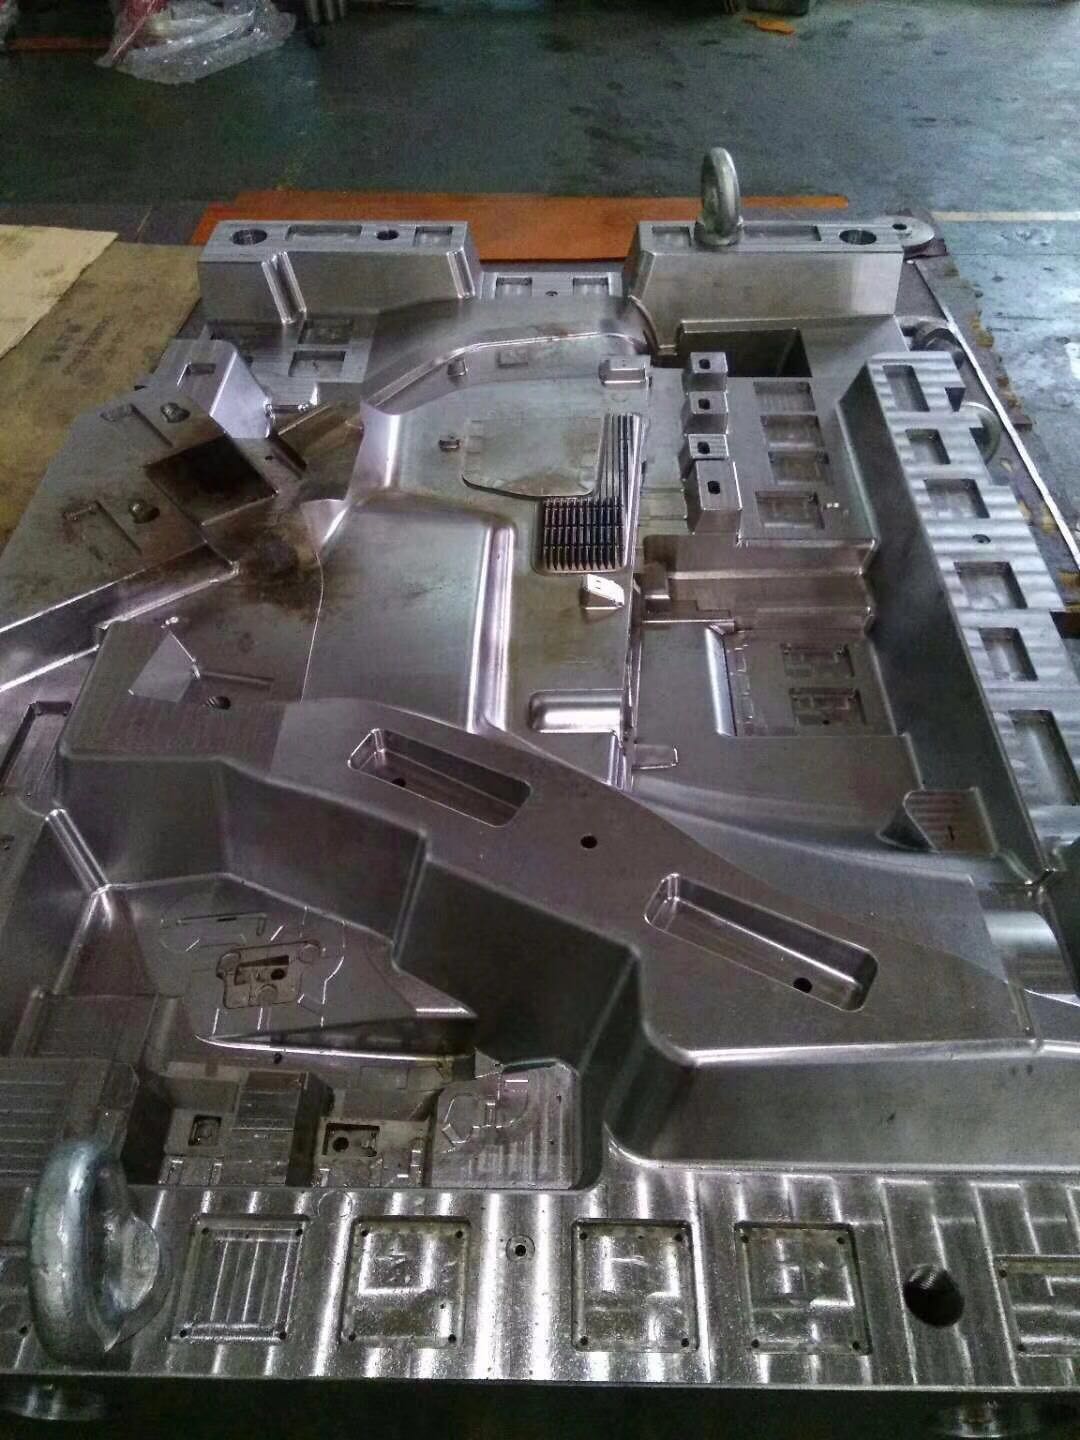 As a precision plastic injection mold factory, how long does it usually take to manufacture a mold?